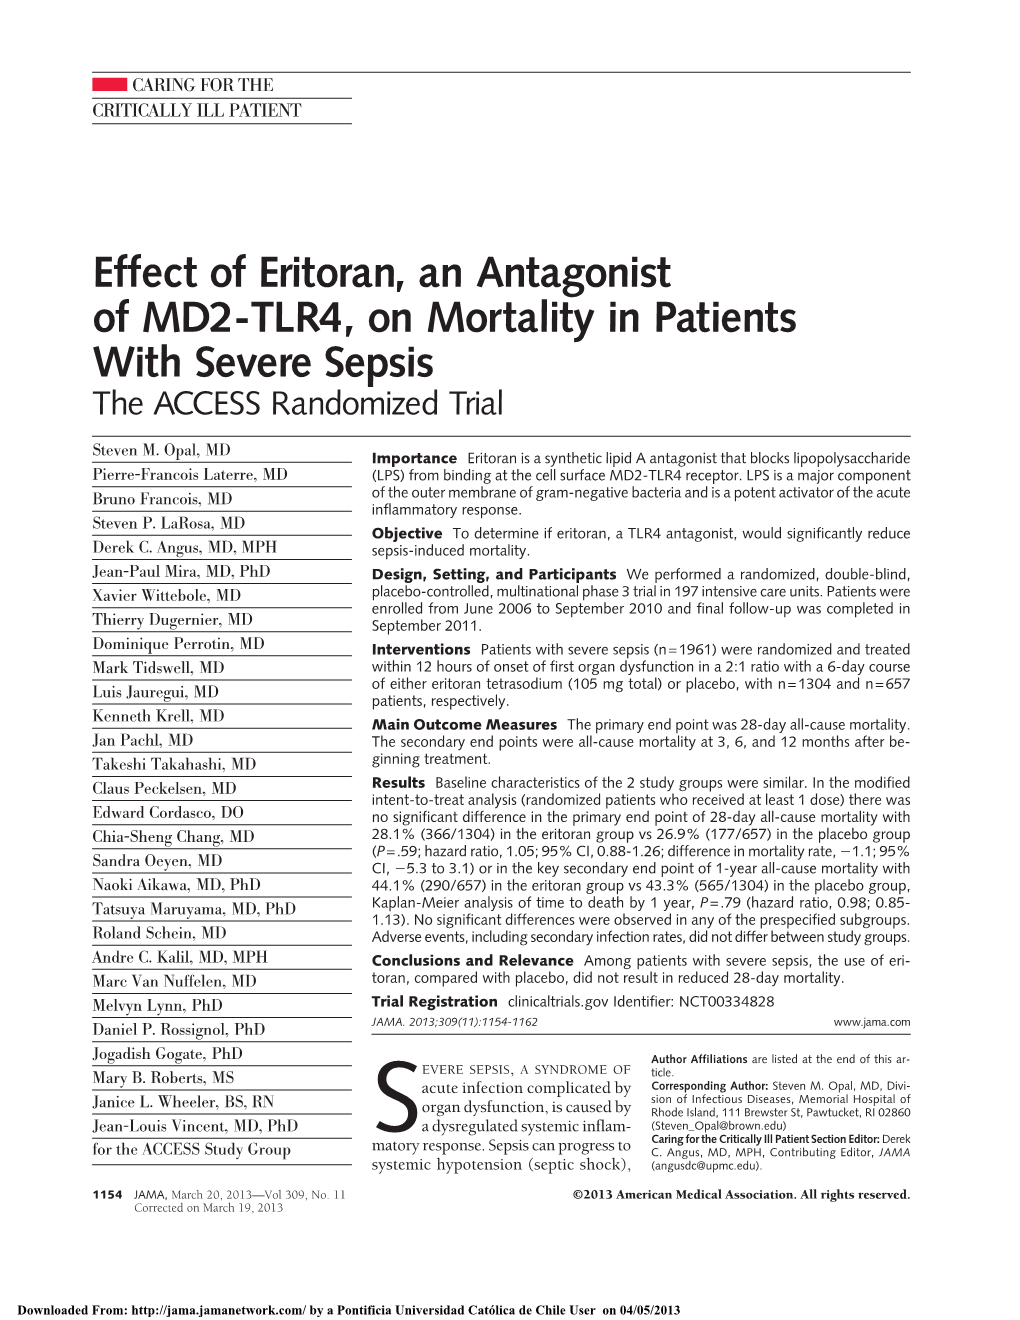 Effect of Eritoran, an Antagonist of MD2-TLR4, on Mortality in Patients with Severe Sepsis the ACCESS Randomized Trial